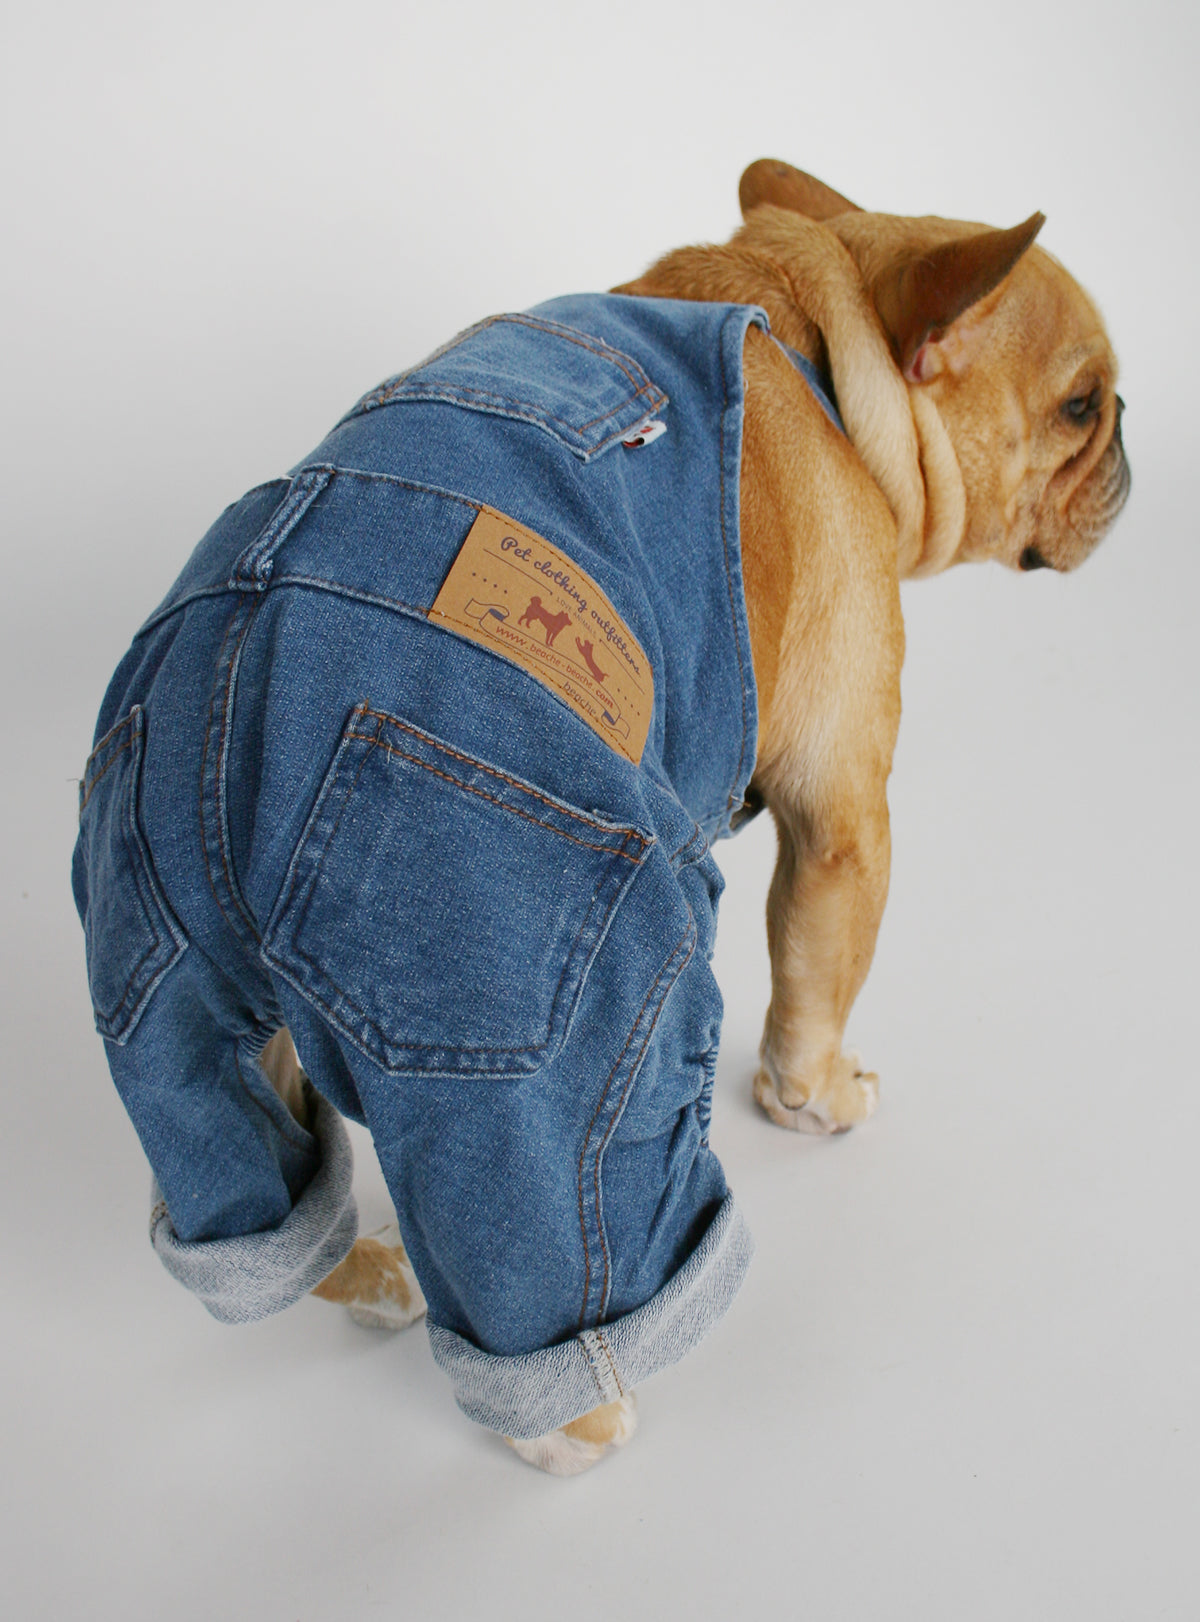 Dog Overalls | Work and Leisure Time Jeans Overalls for Dogs | DiivaDog.com